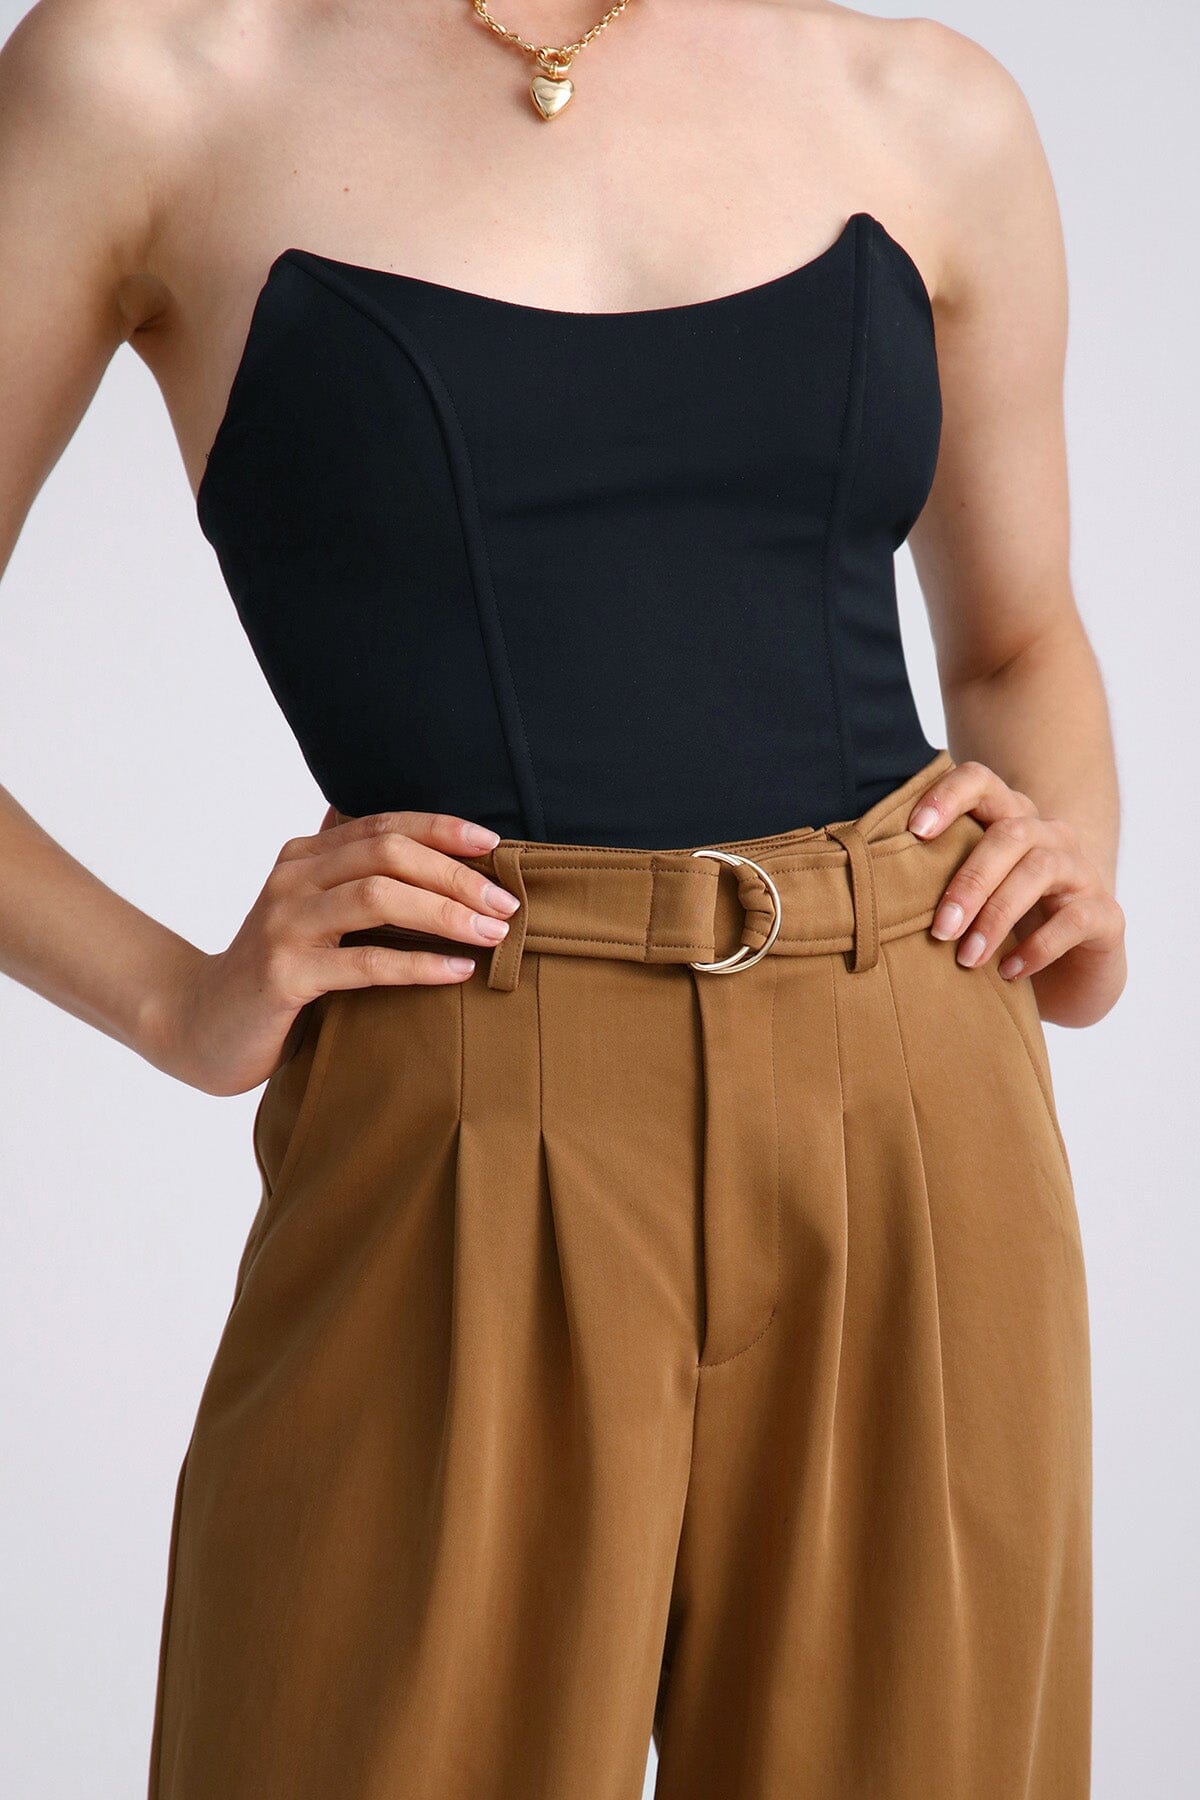 Amber brown lyocell blend belted wide leg trouser pant - figure flattering high waisted trousers bottoms for ladies 